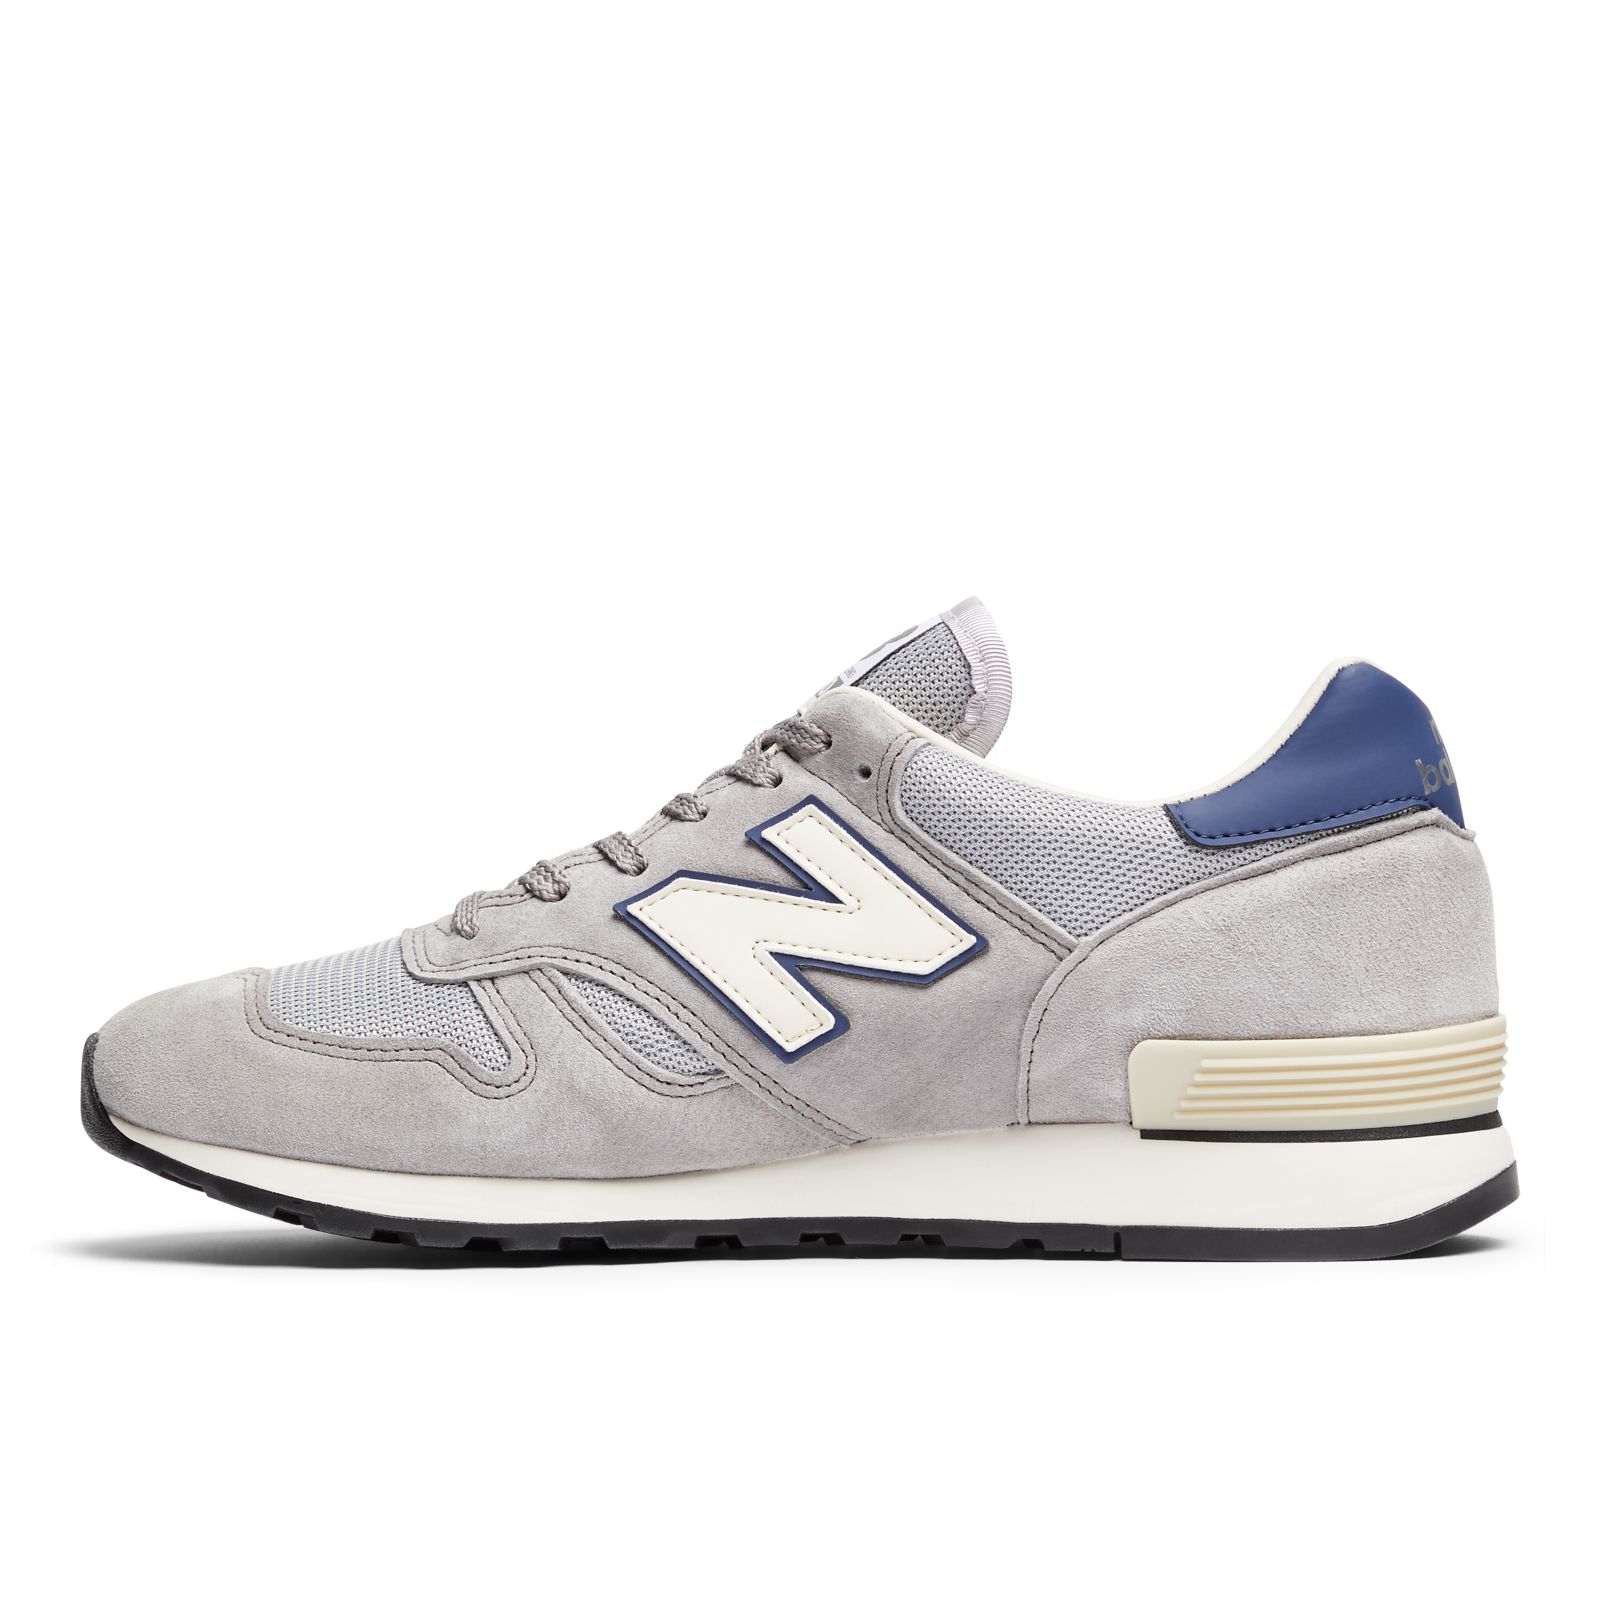 Hombre MADE in UK 670 New Balance